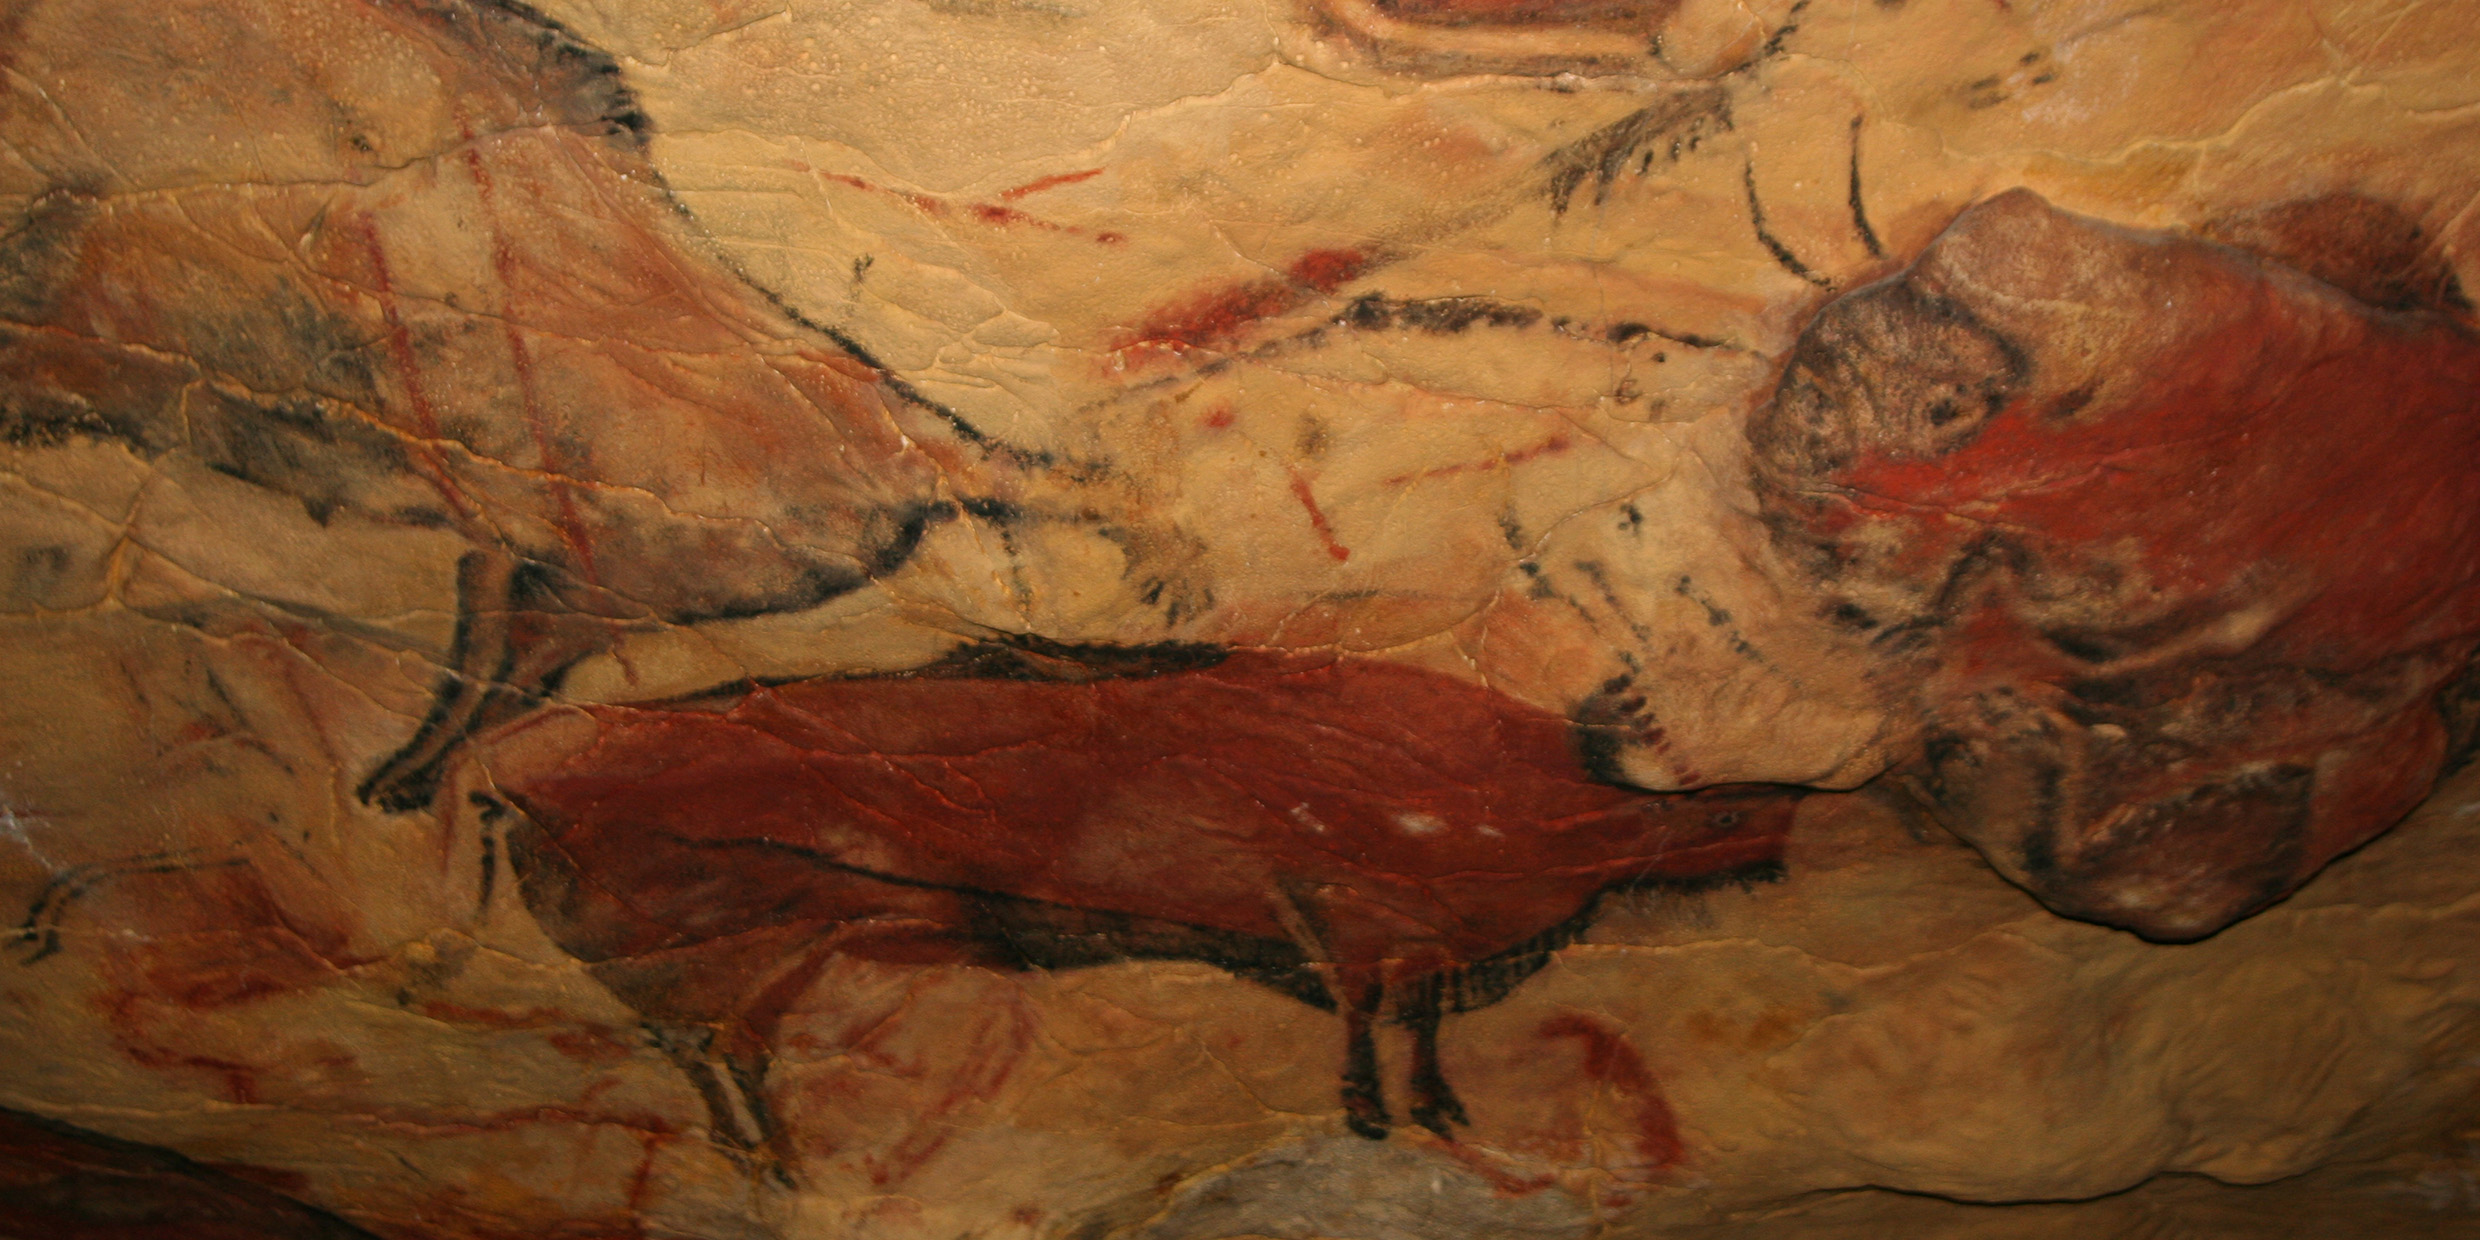 Image of cave paintings